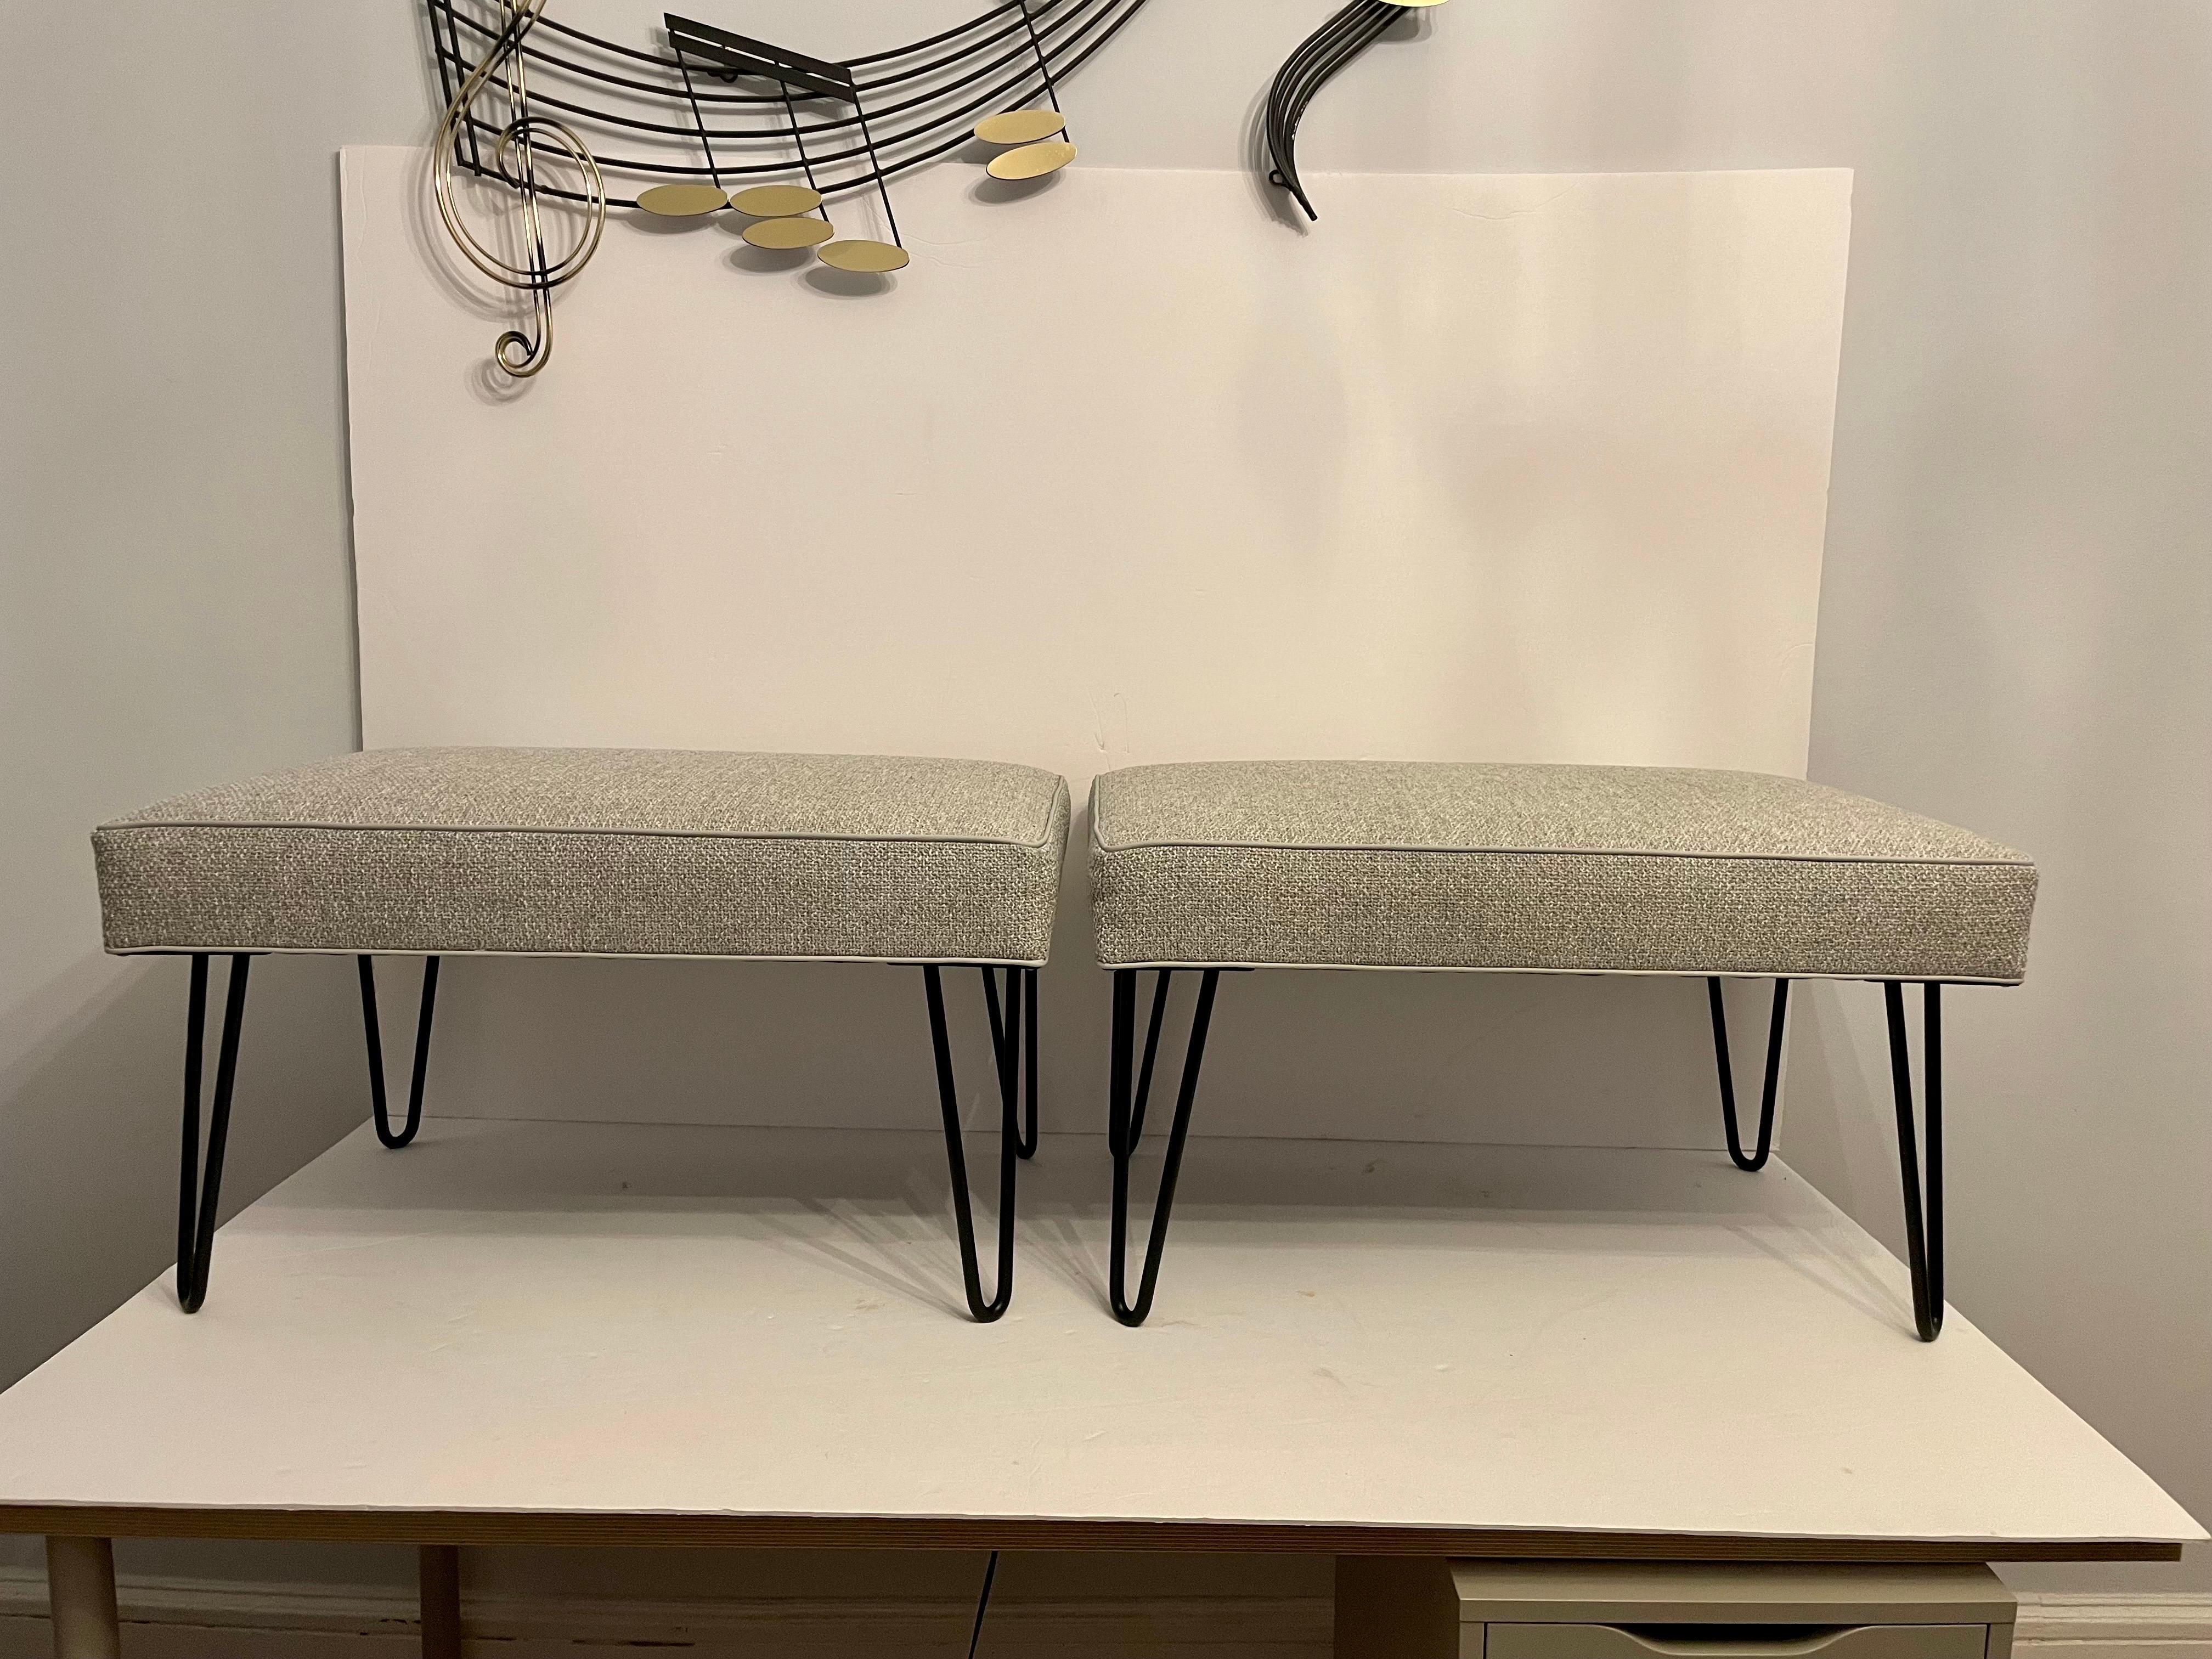 Pair of custom hairpin leg benches, with satin black powder coated iron legs and four inch thick upholstered seats. Shown in 28